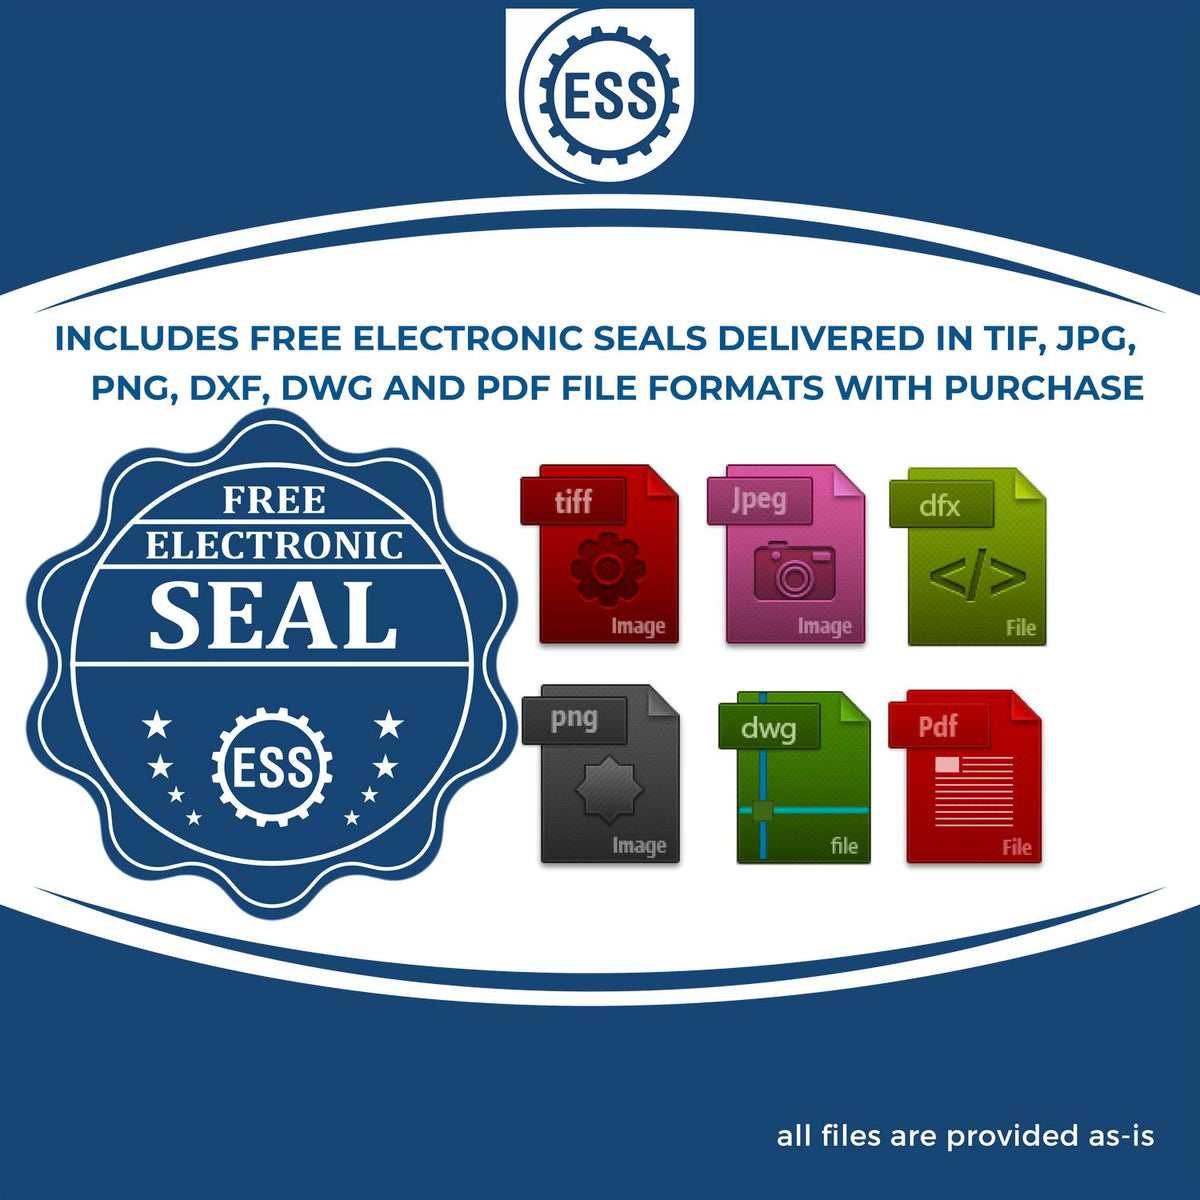 An infographic for the free electronic seal for the State of West Virginia Architectural Seal Embosser illustrating the different file type icons such as DXF, DWG, TIF, JPG and PNG.